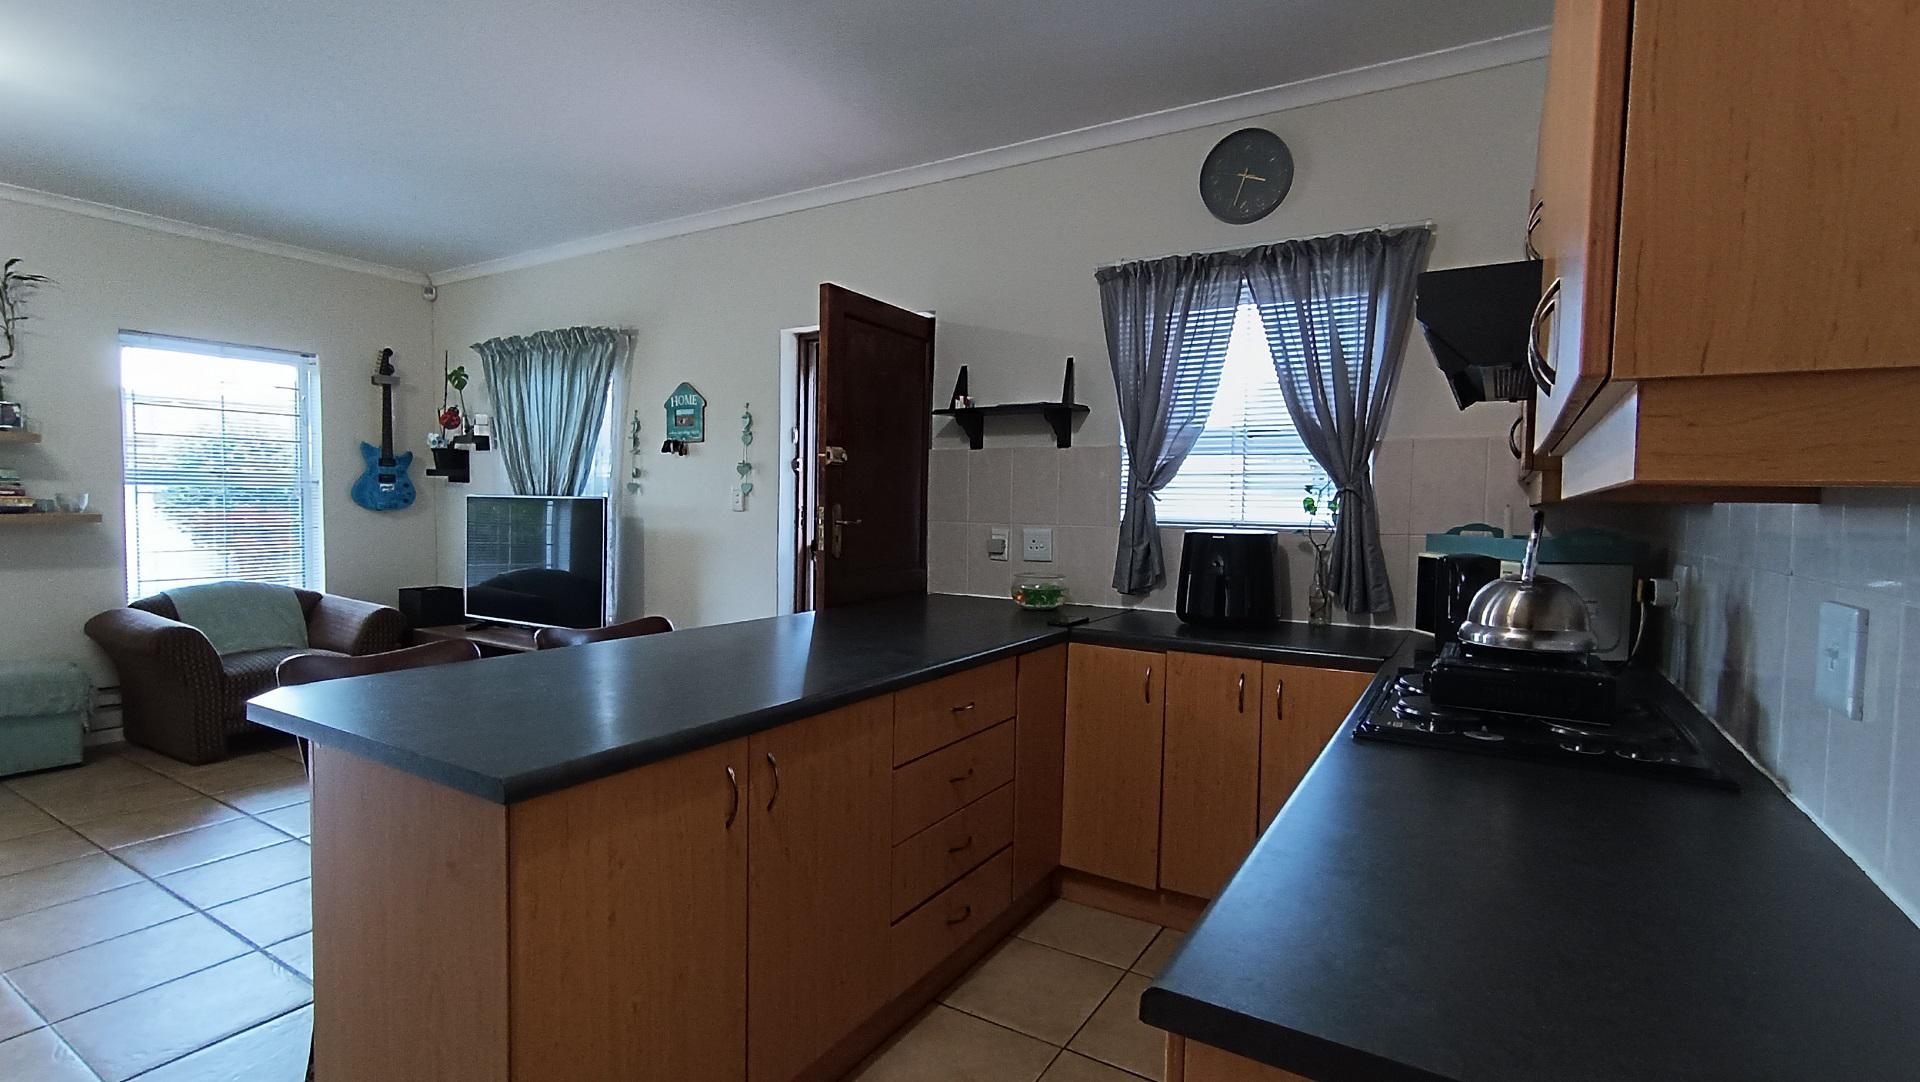 Kitchen - 11 square meters of property in Brackenfell South